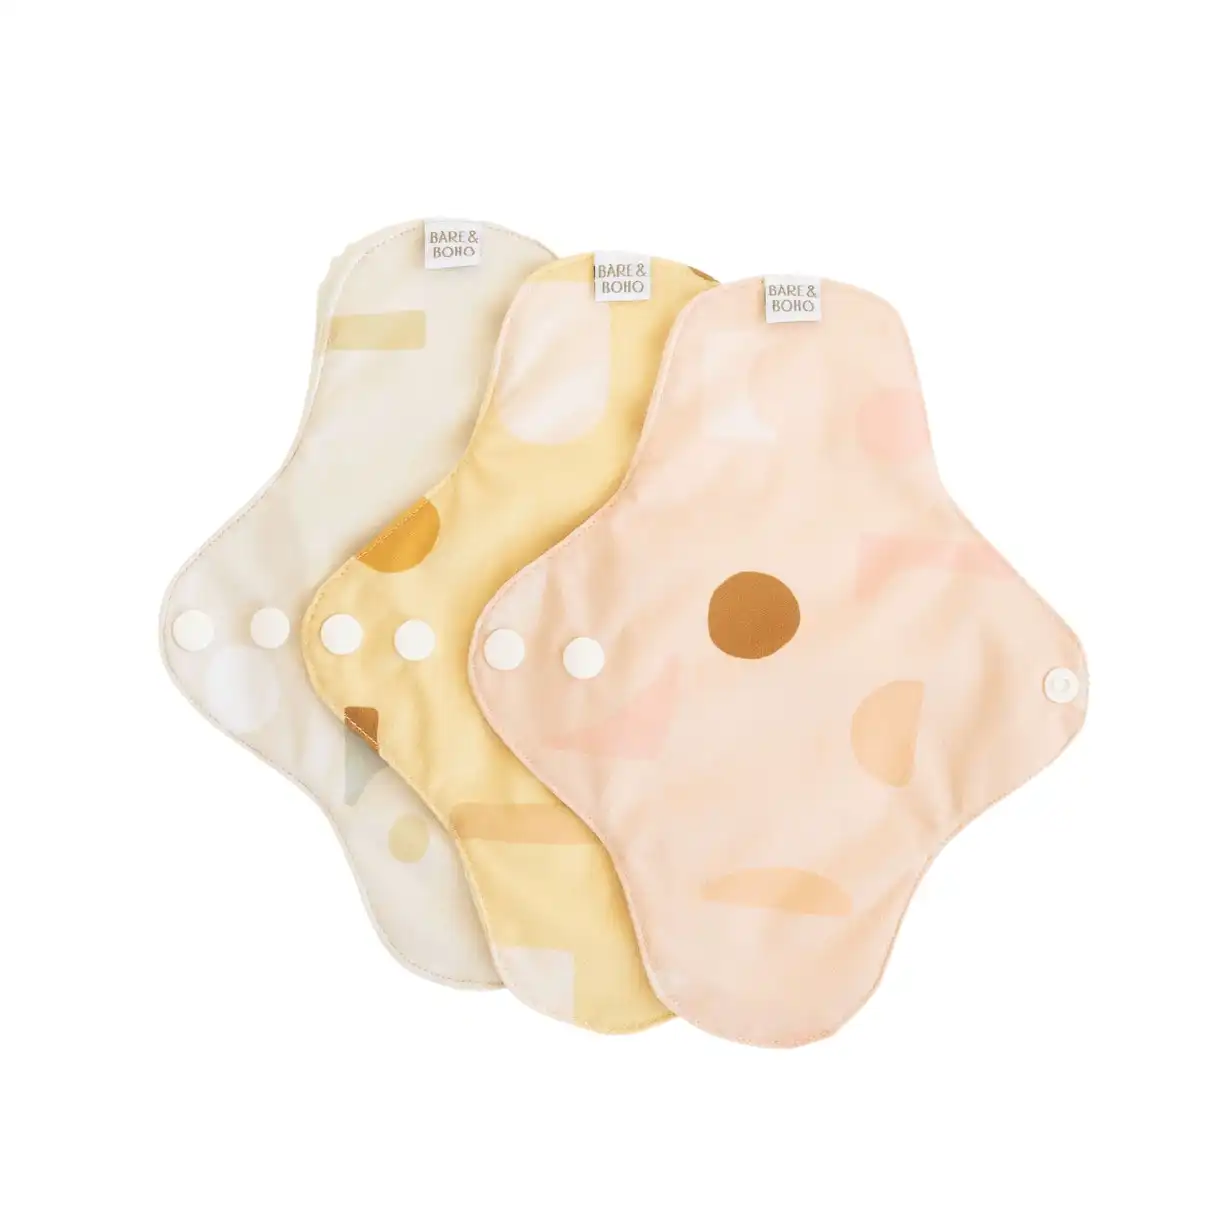 Bare and Boho Reusable Cloth Pads Light Shapes 3 Pack